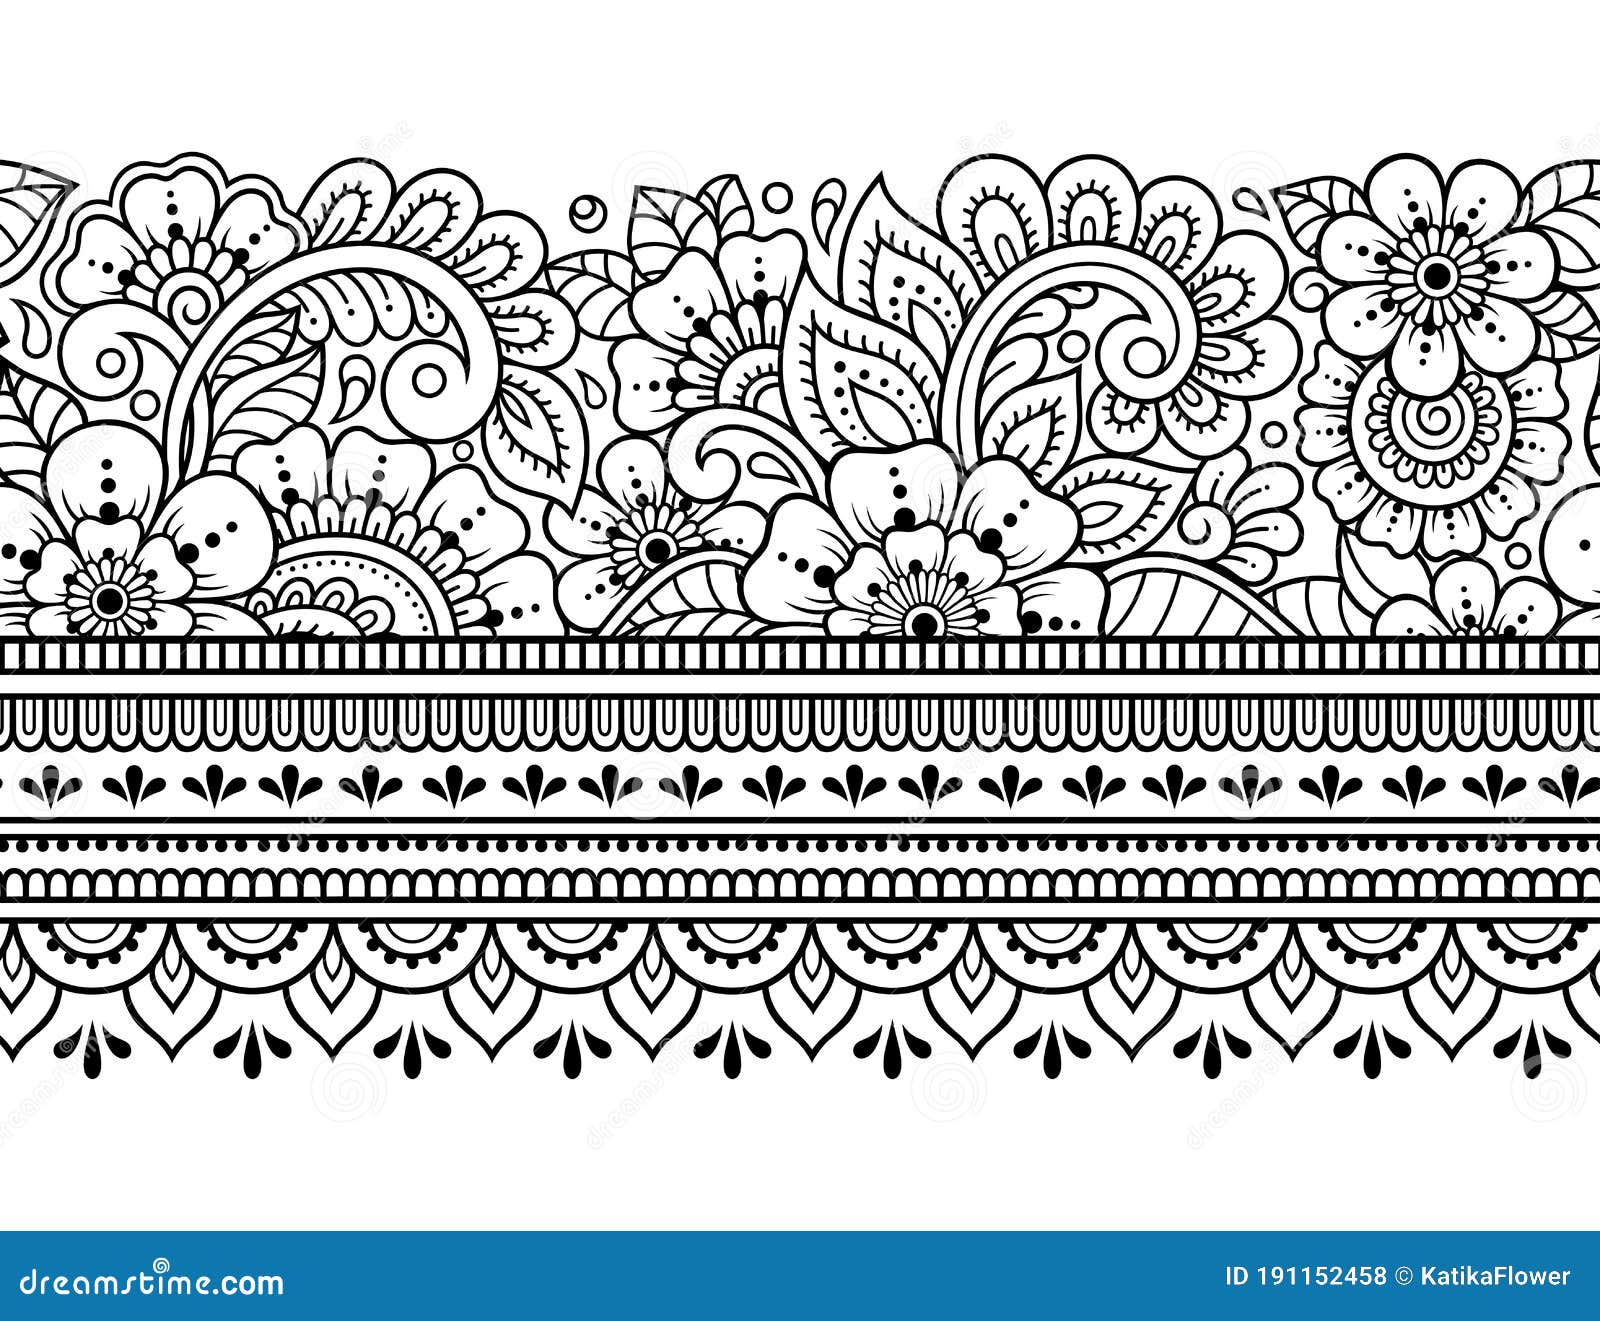 Mehndi Corner And Border Designs High-Res Vector Graphic - Getty Images